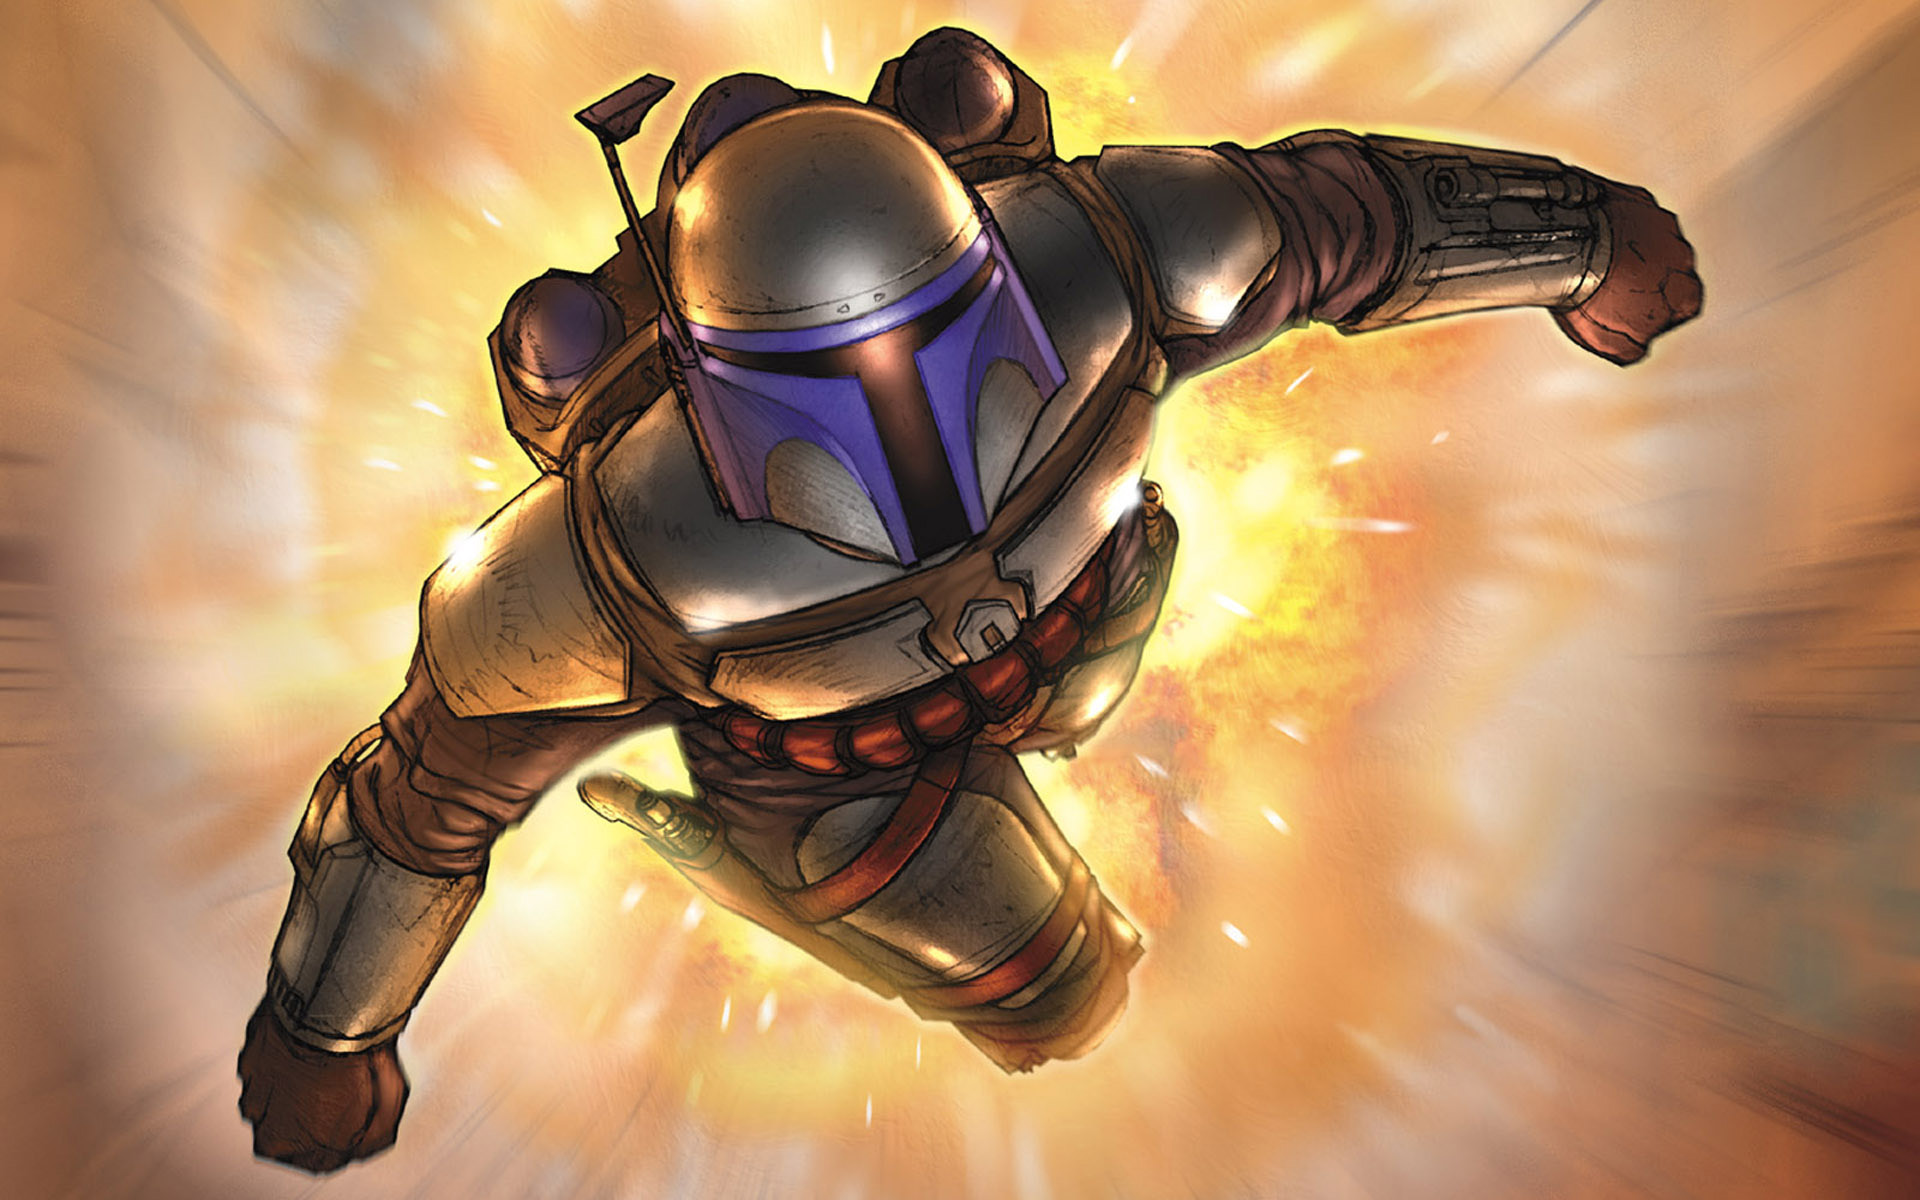 free star wars bounty hunter game download for pc full version